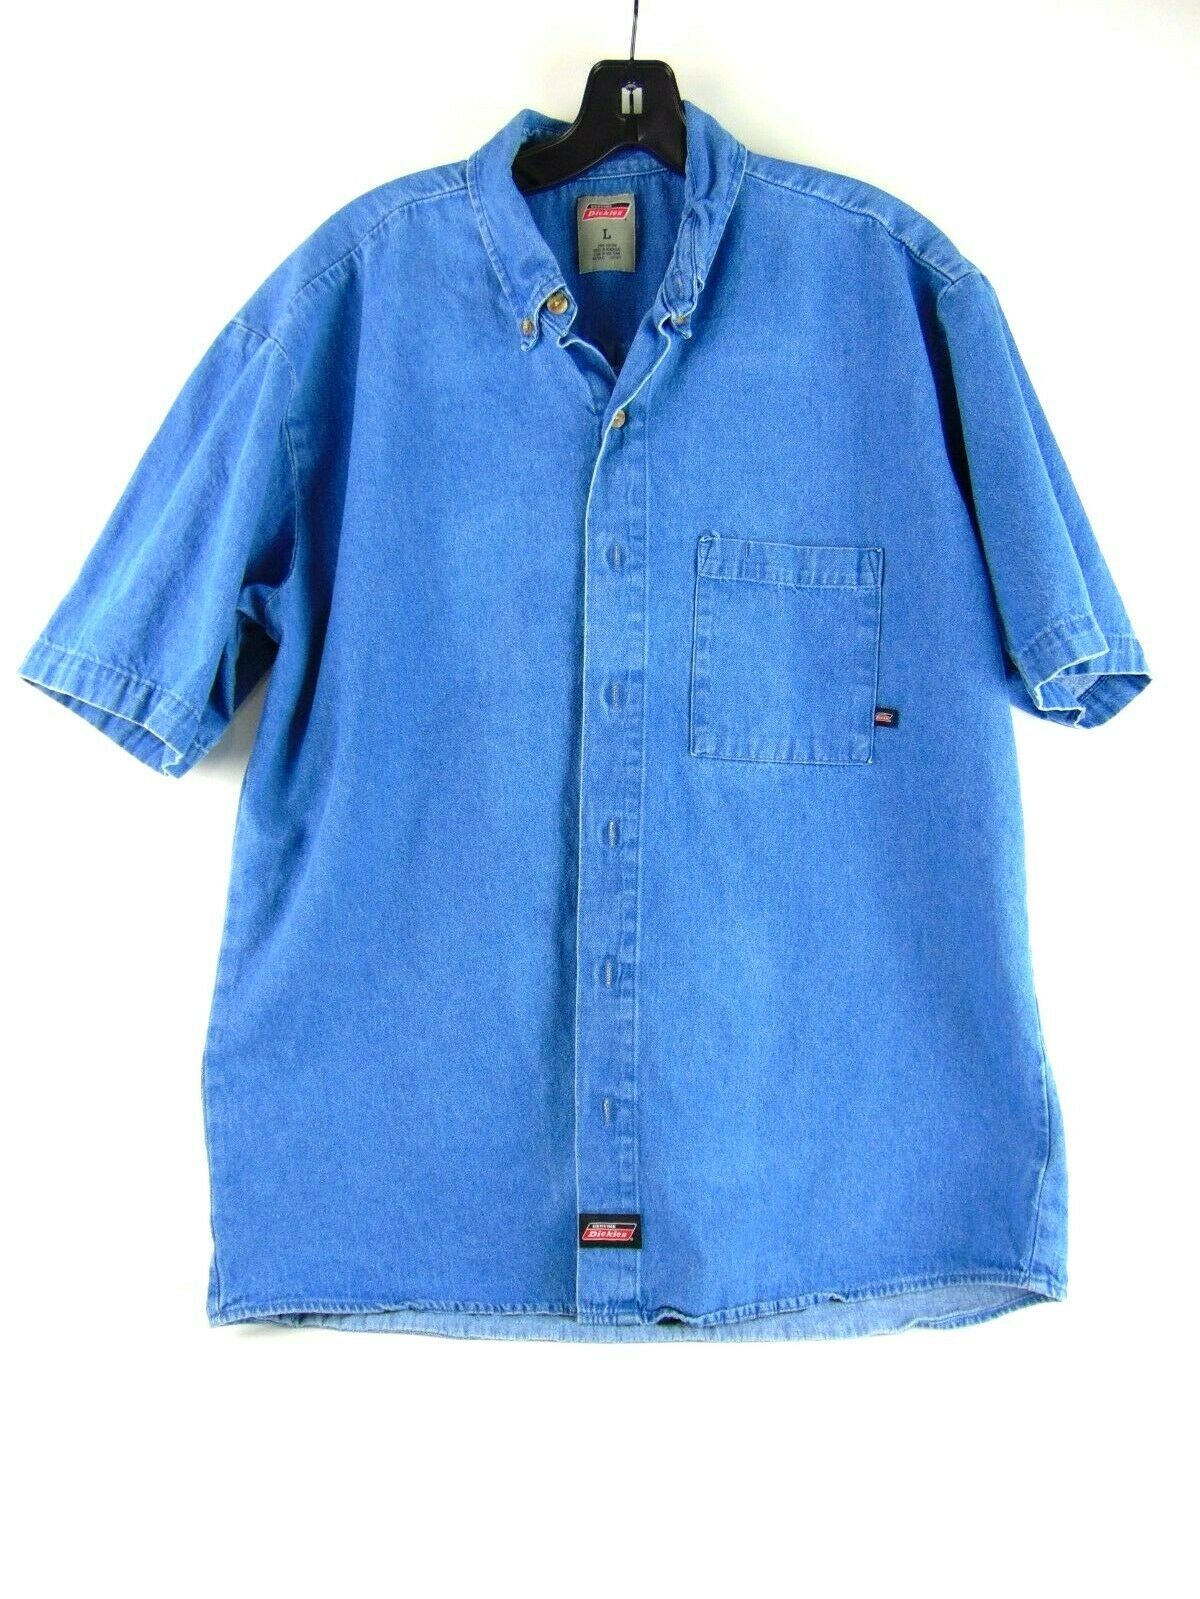 Primary image for Dickies Blue Denim Button Down Shirt L